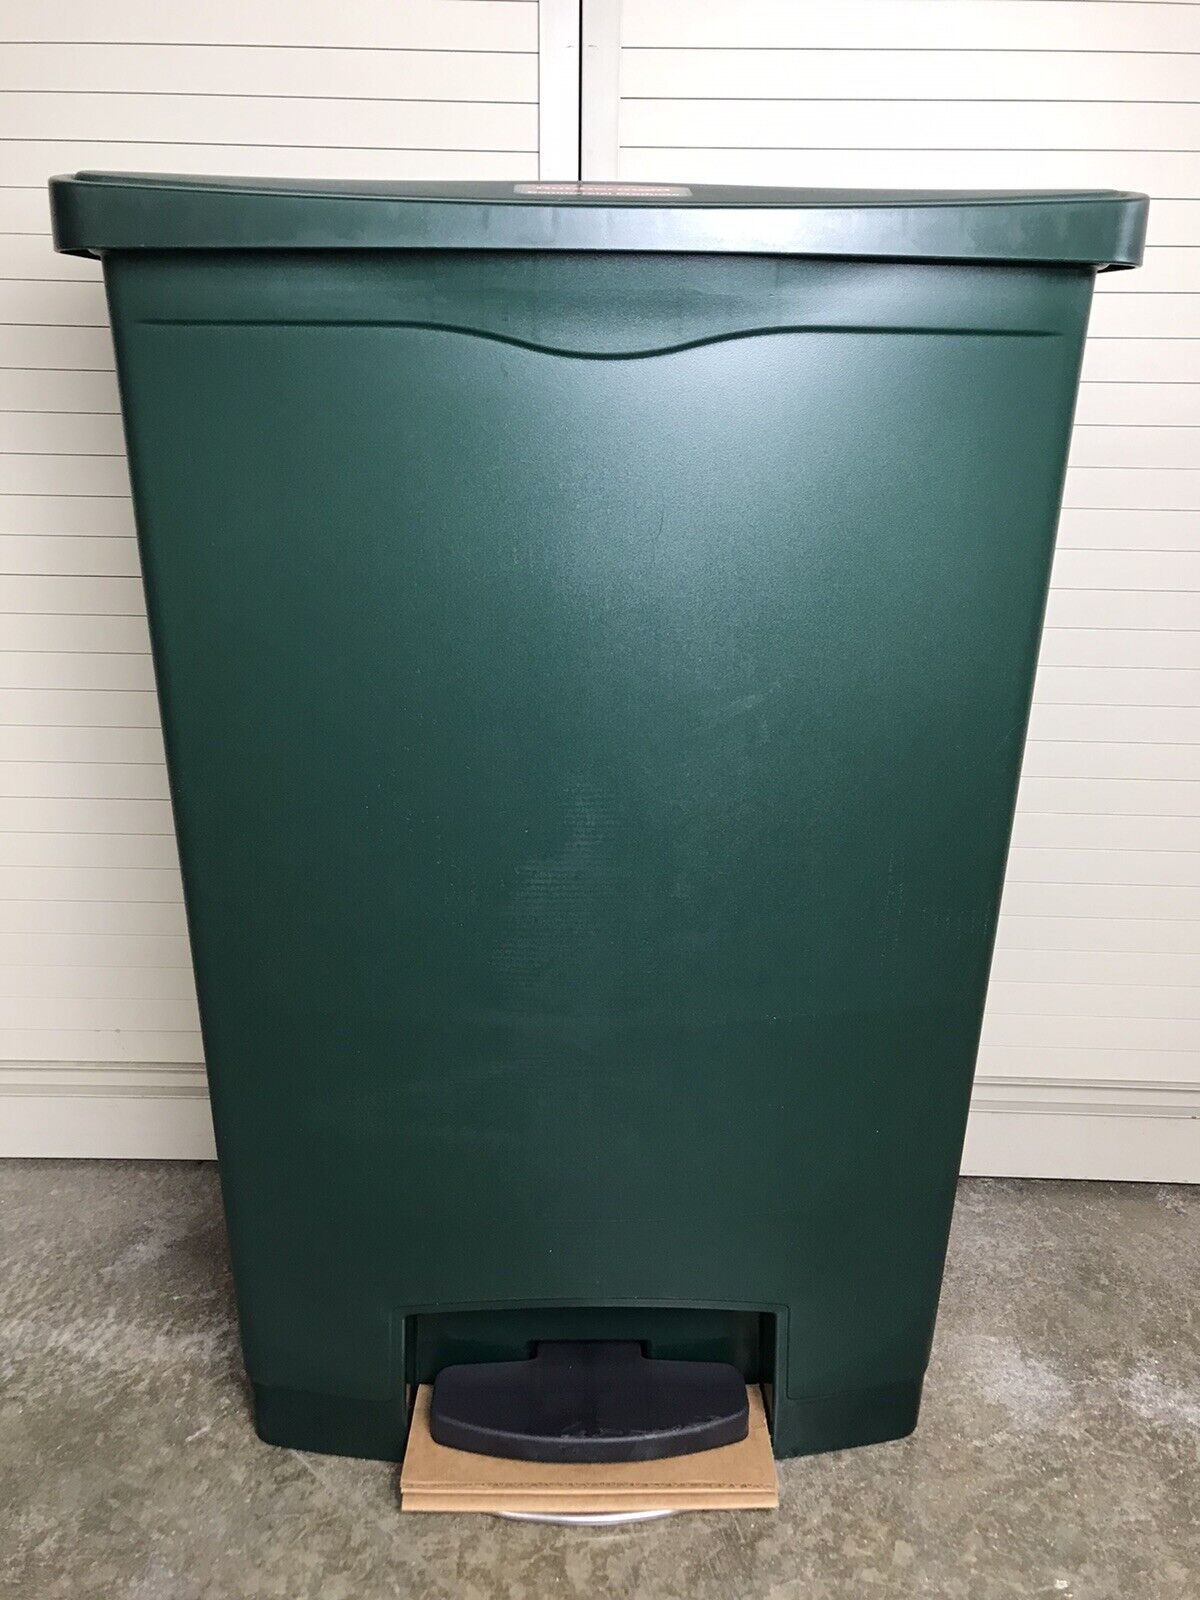 Rubbermaid Plastic Step-On Container 90L/24G Green